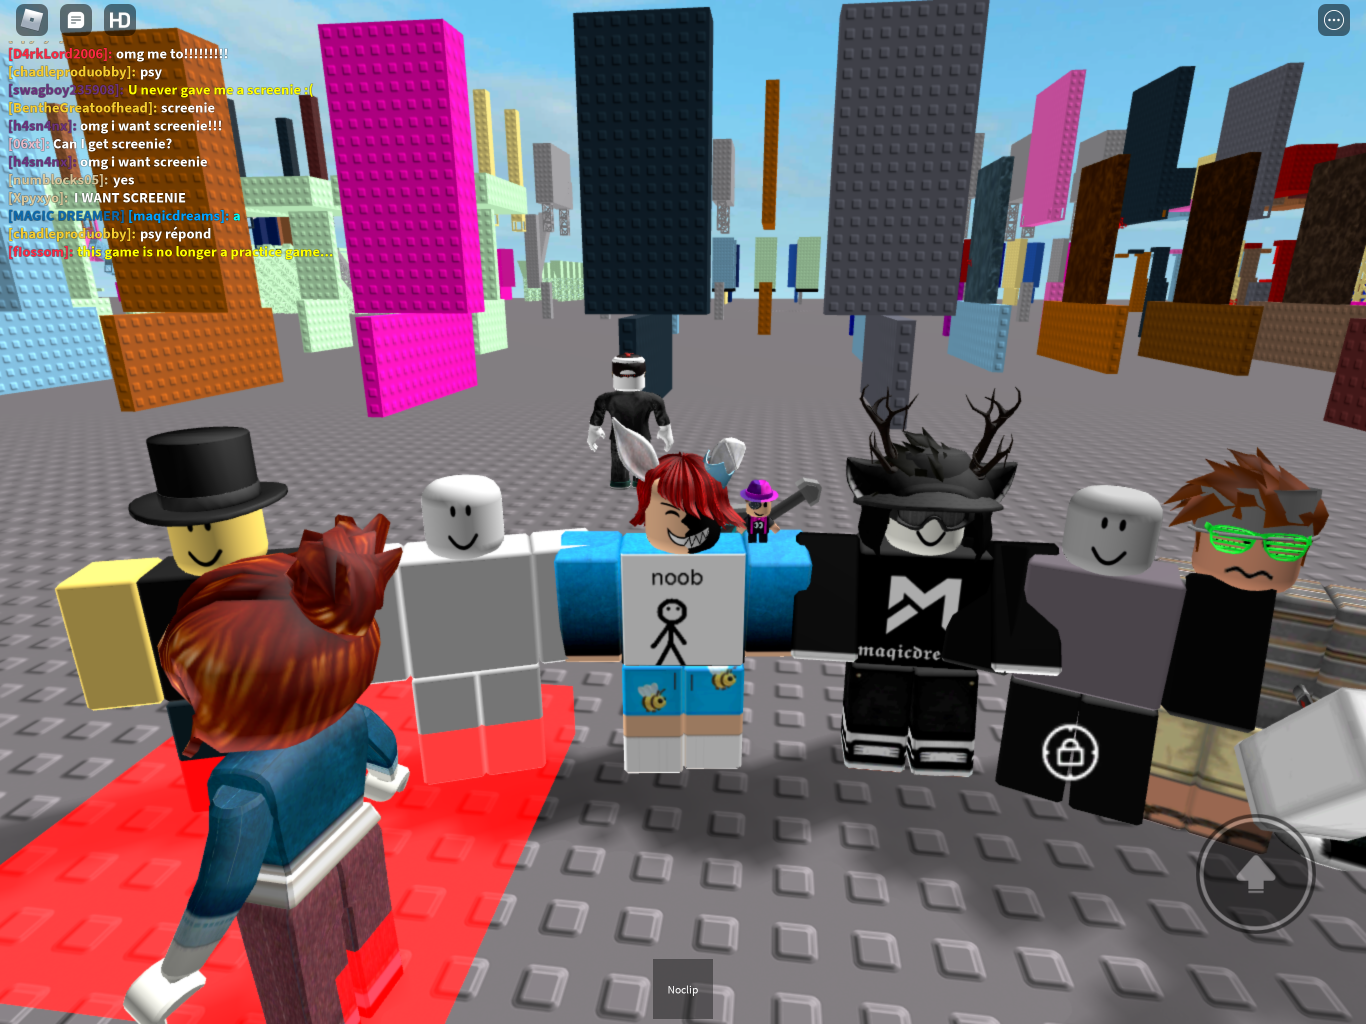 Crowded roblox game has YouTuber in it Blank Meme Template